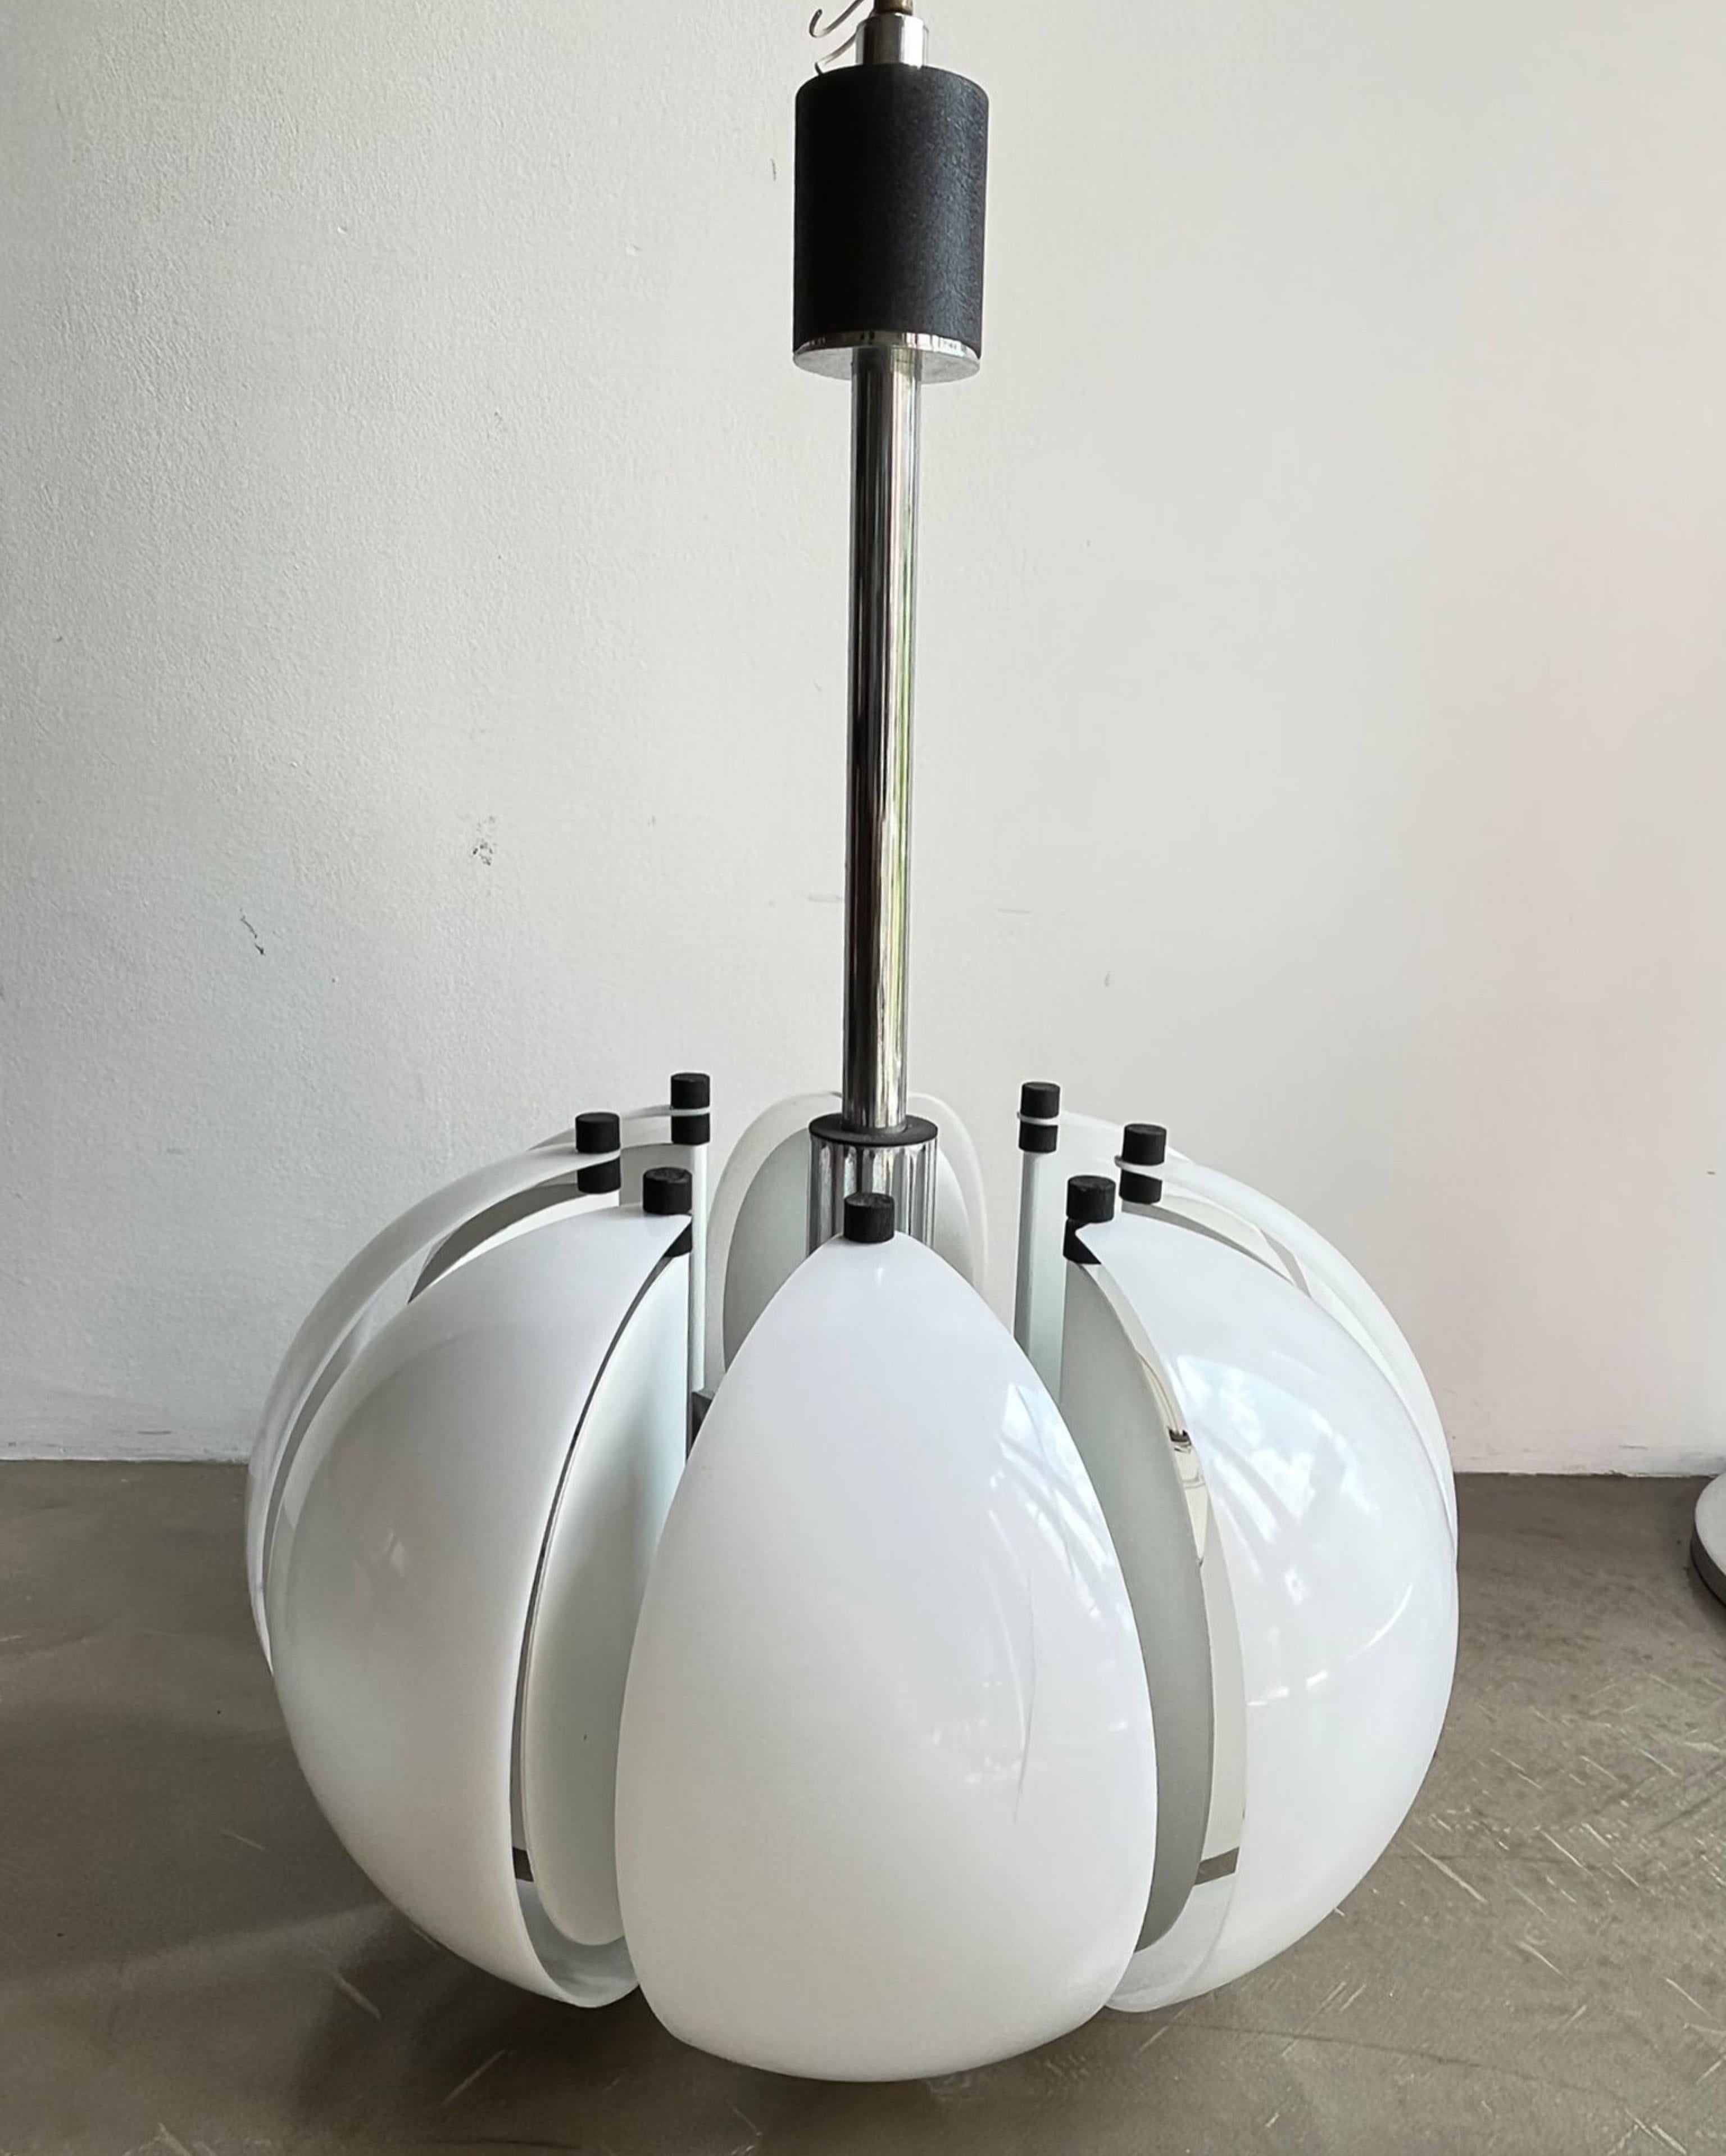 Suspension lamp, white ceiling lamp named Spicchio and born from the creativity of Danilo and Corrado Aroldi for Stilnovo in the 1970s. 

The lamp is in excellent condition, with original wiring. The frame is made of chrome-plated steel and white